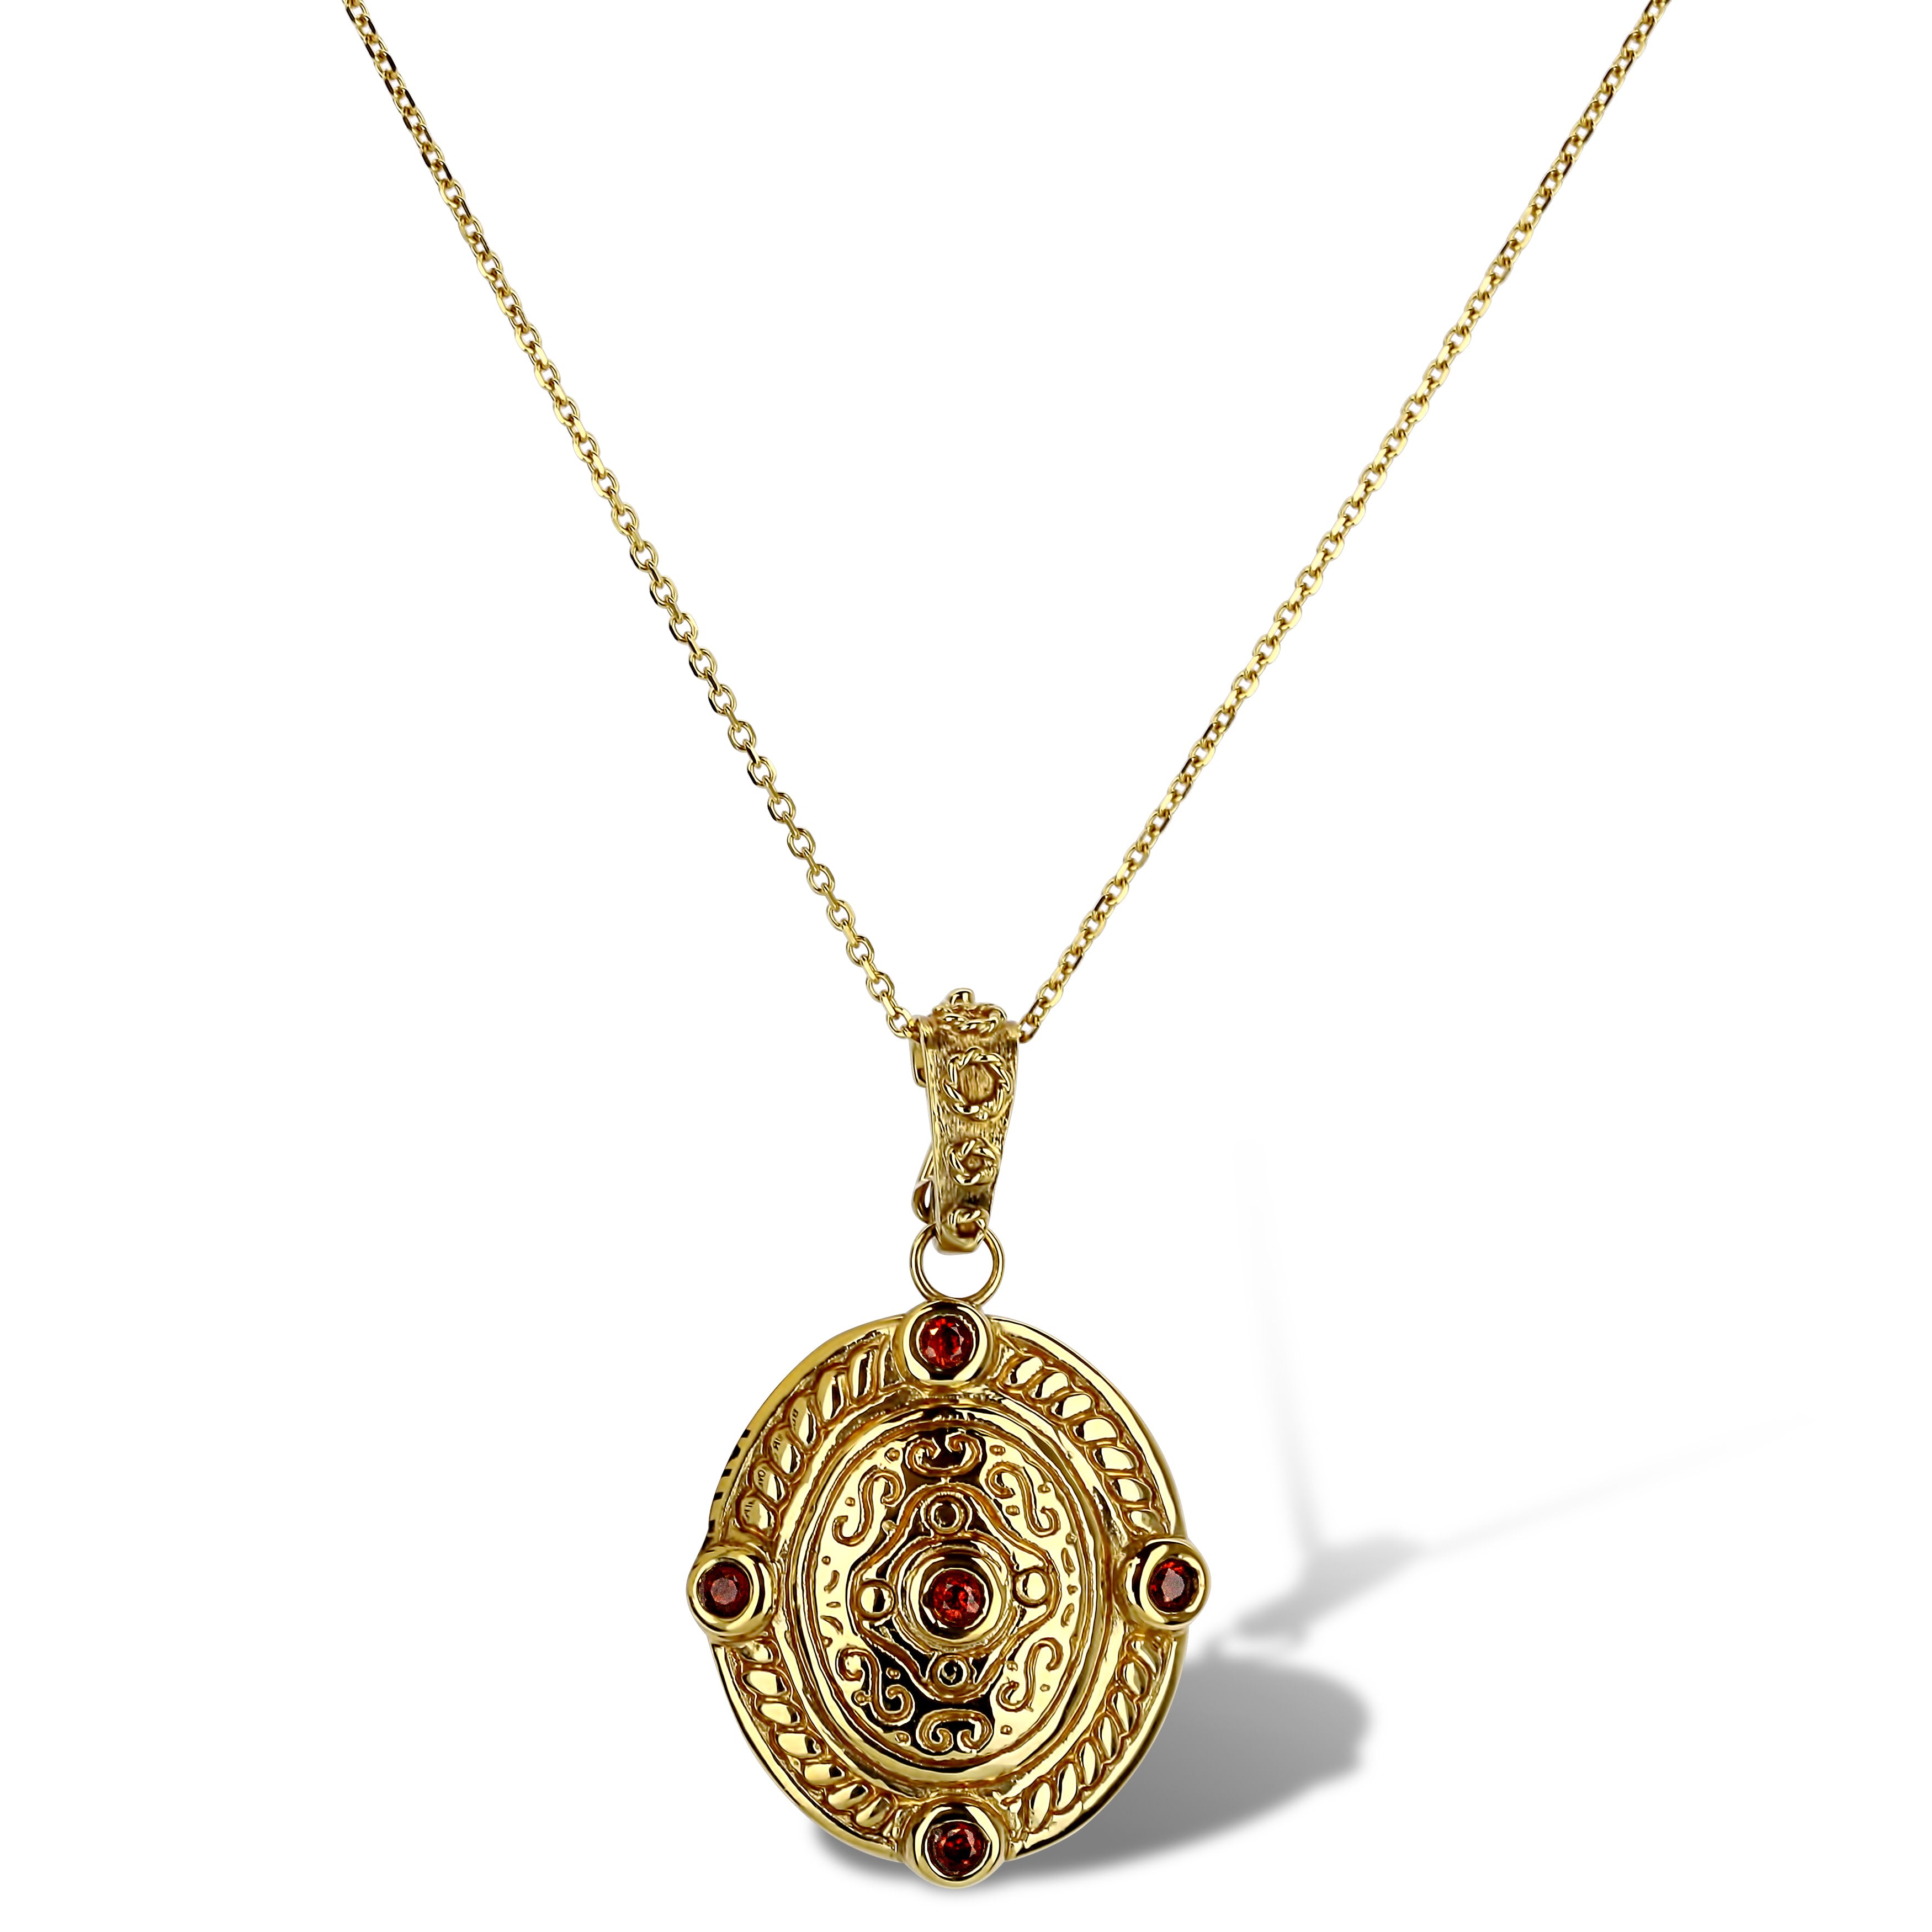 Yellow Gold Oval Pendant With Garnets